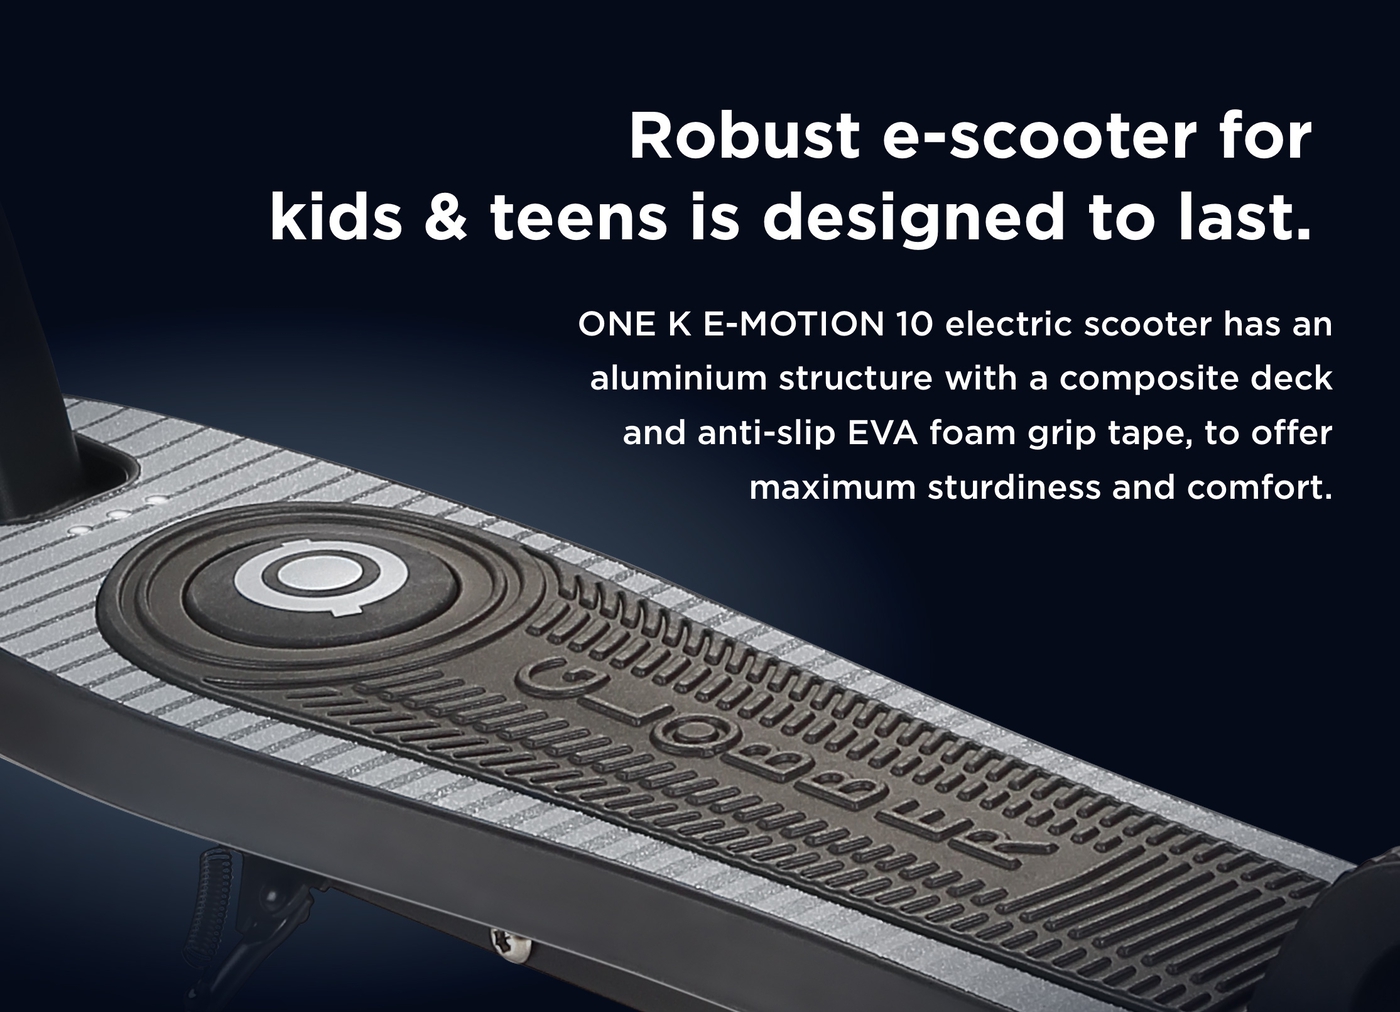 Robust e-scooter for kids & teens is designed to last.